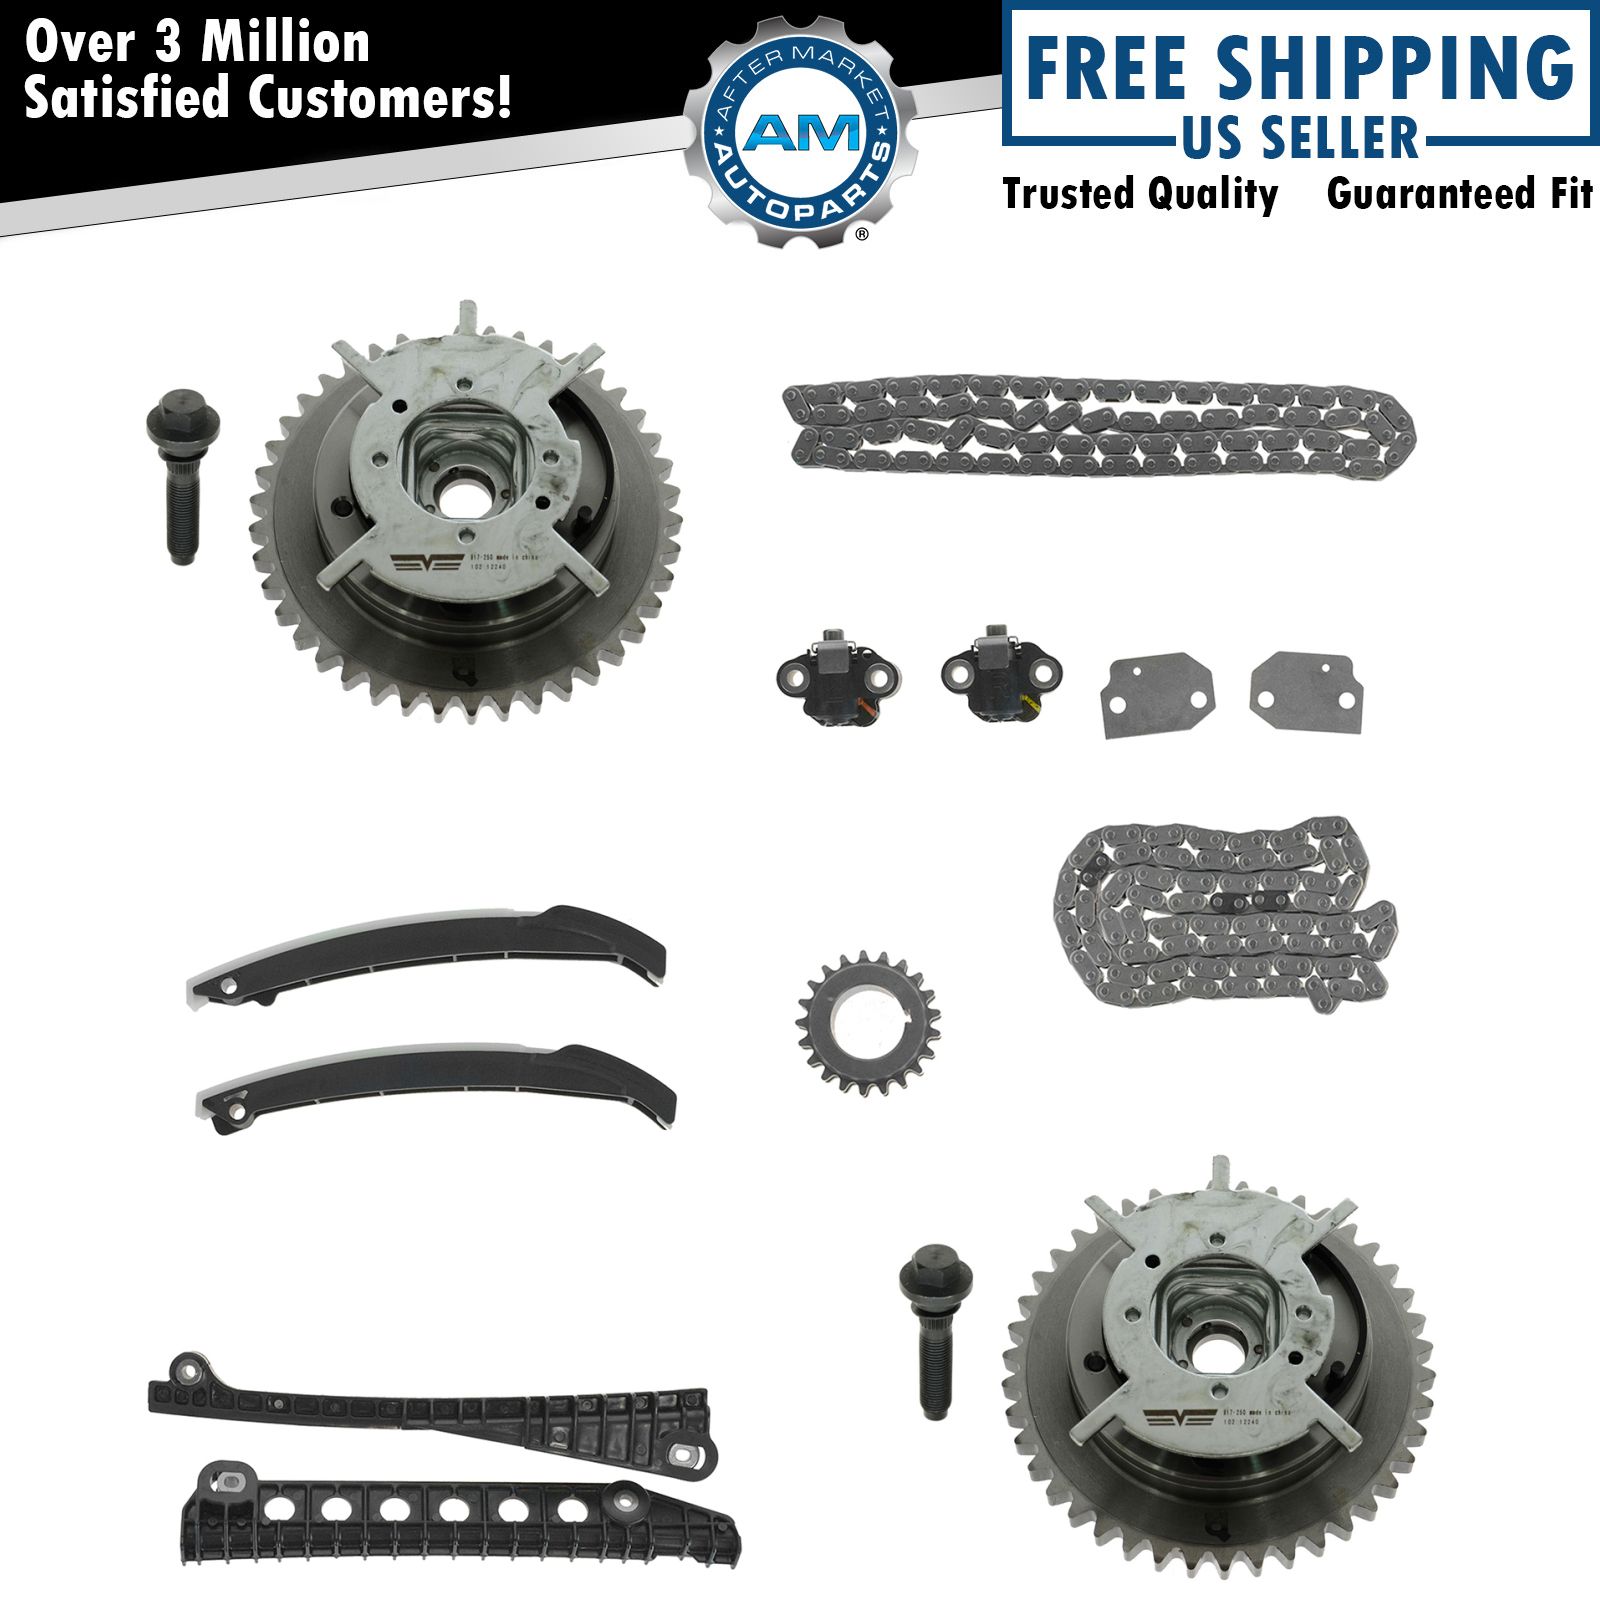 Timing Chain Kit Sprocket Guide Set For Ford F150 F250 F350 Navigator Expedition